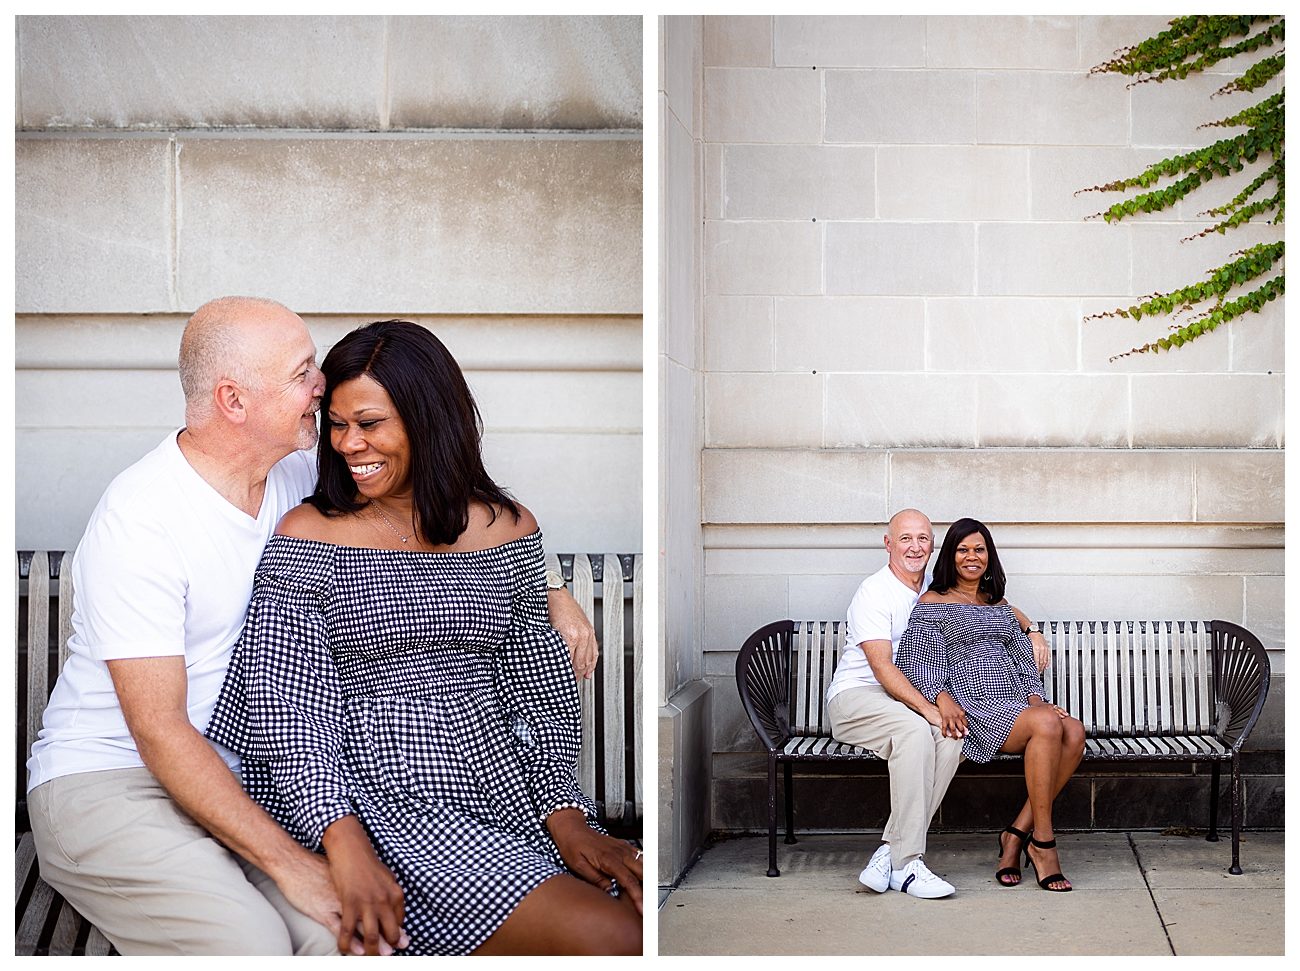 downtown urbana summer engagement session